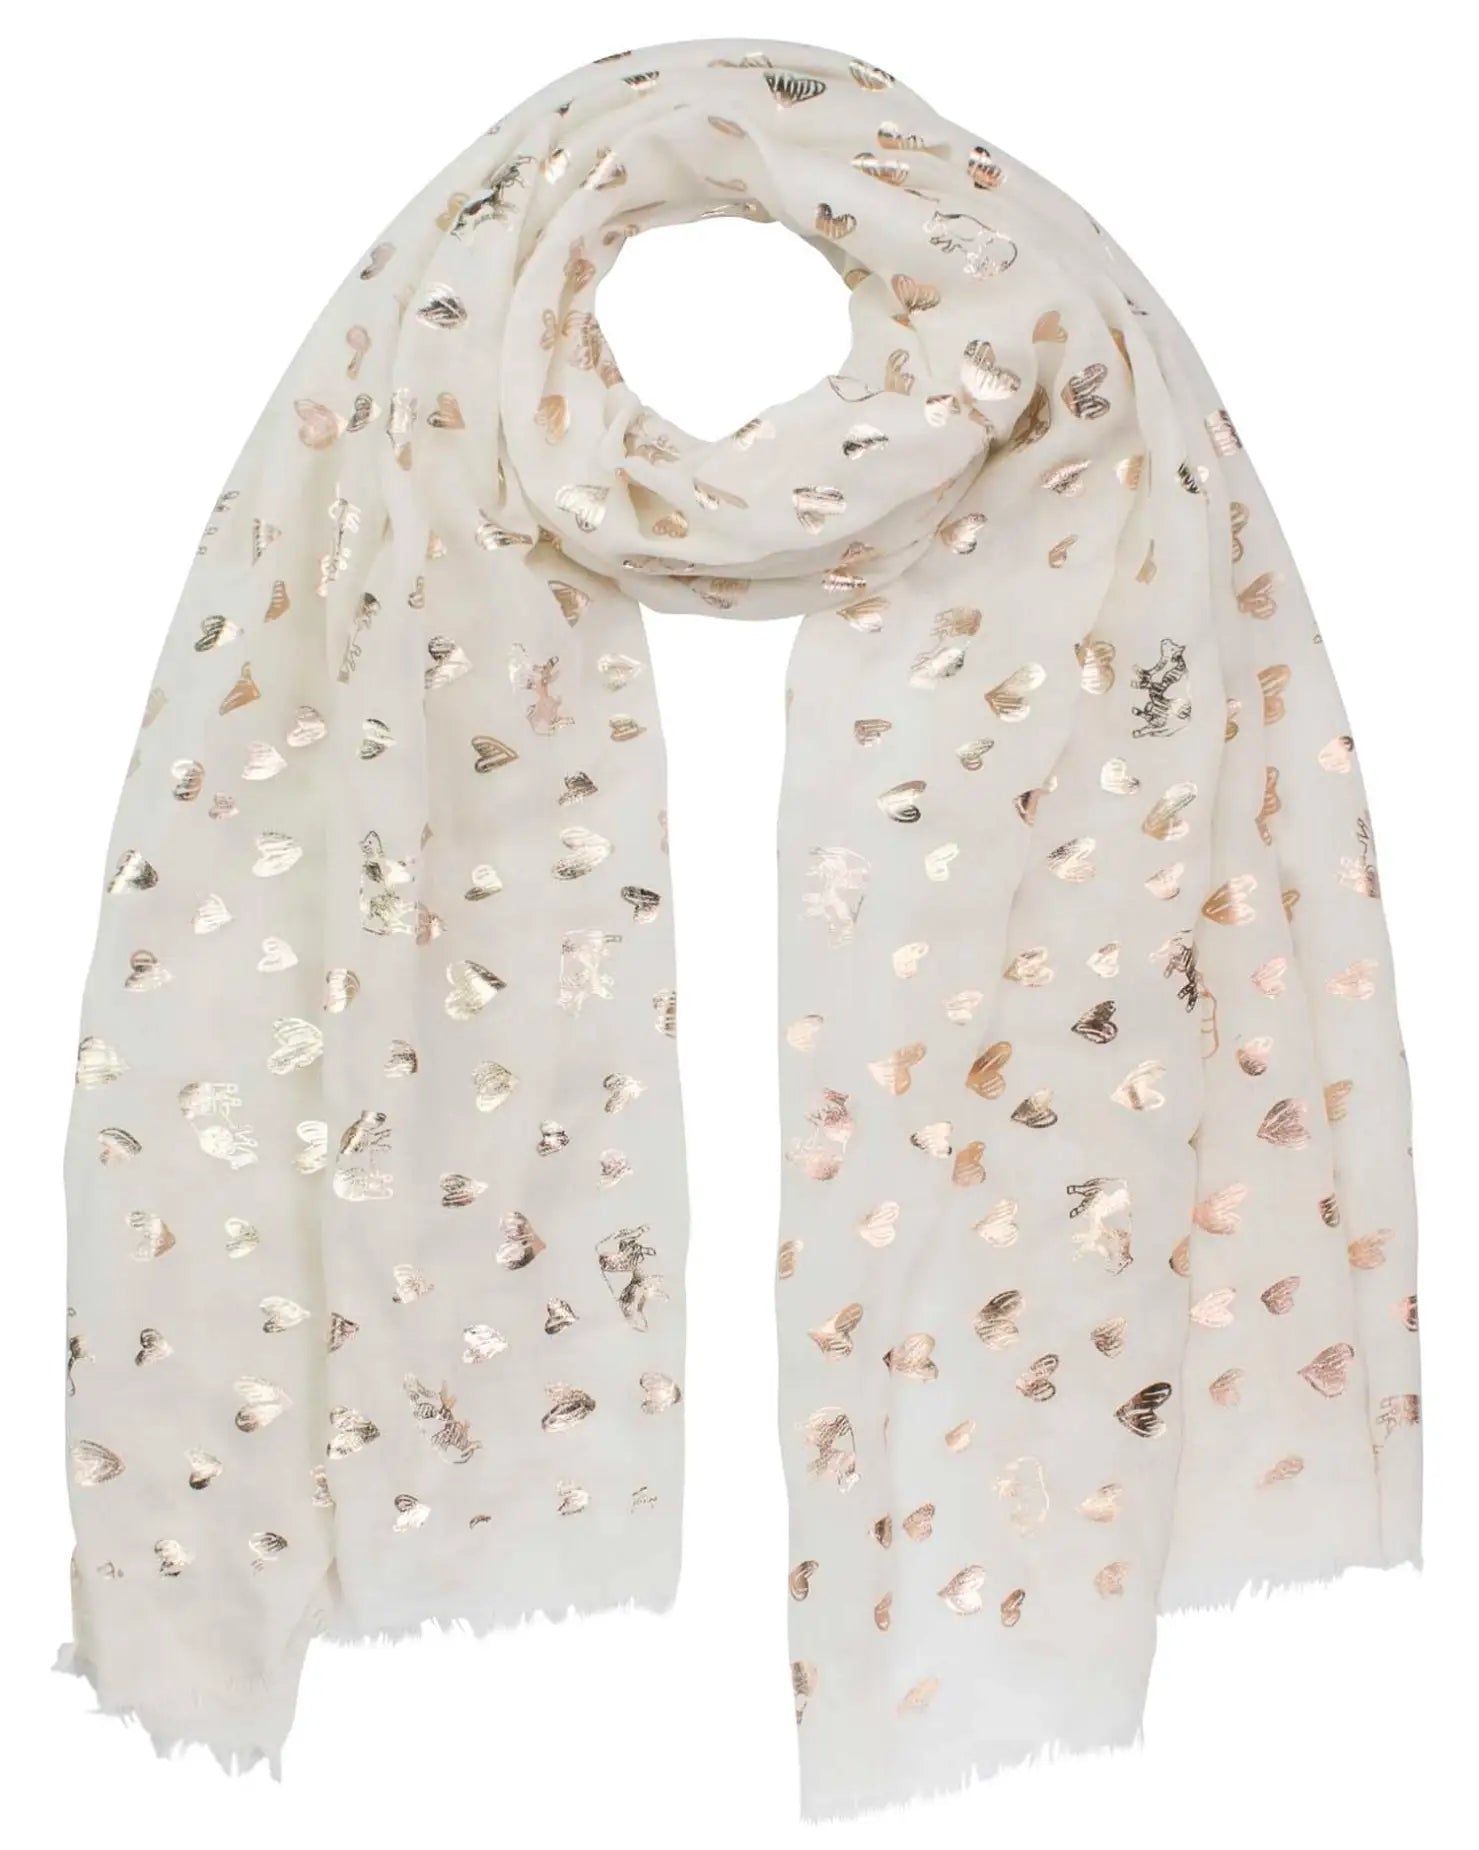 White scarf with gold foil foils in Heart & Cow Print Silver Foil Oversized Scarf.